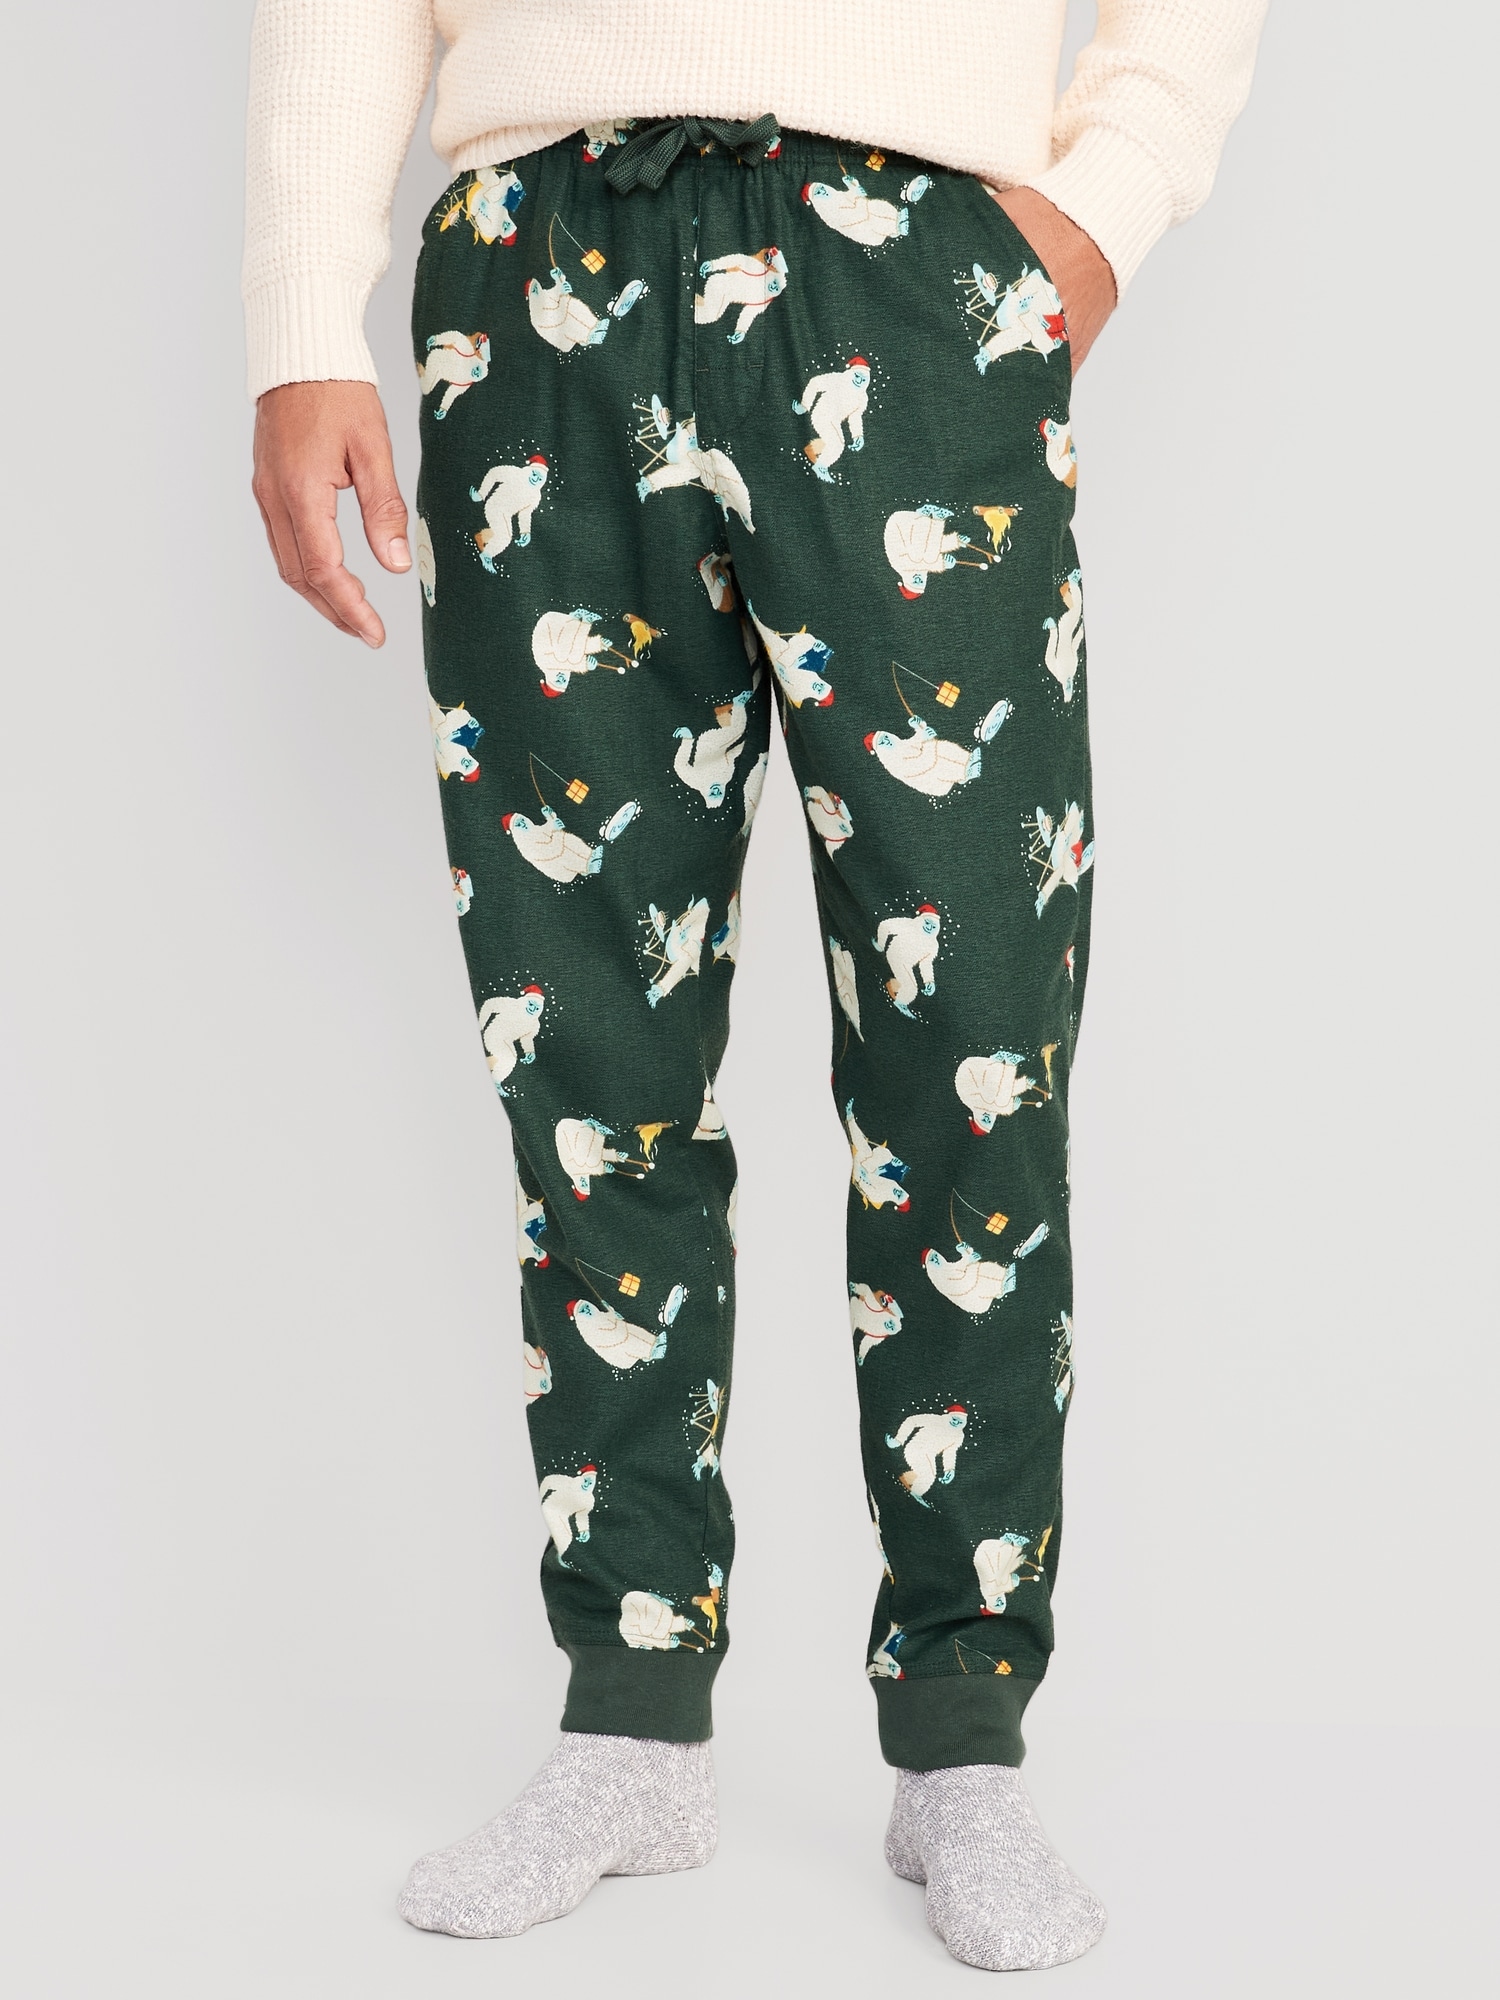 Old Navy Flannel Jogger Pajama Pants